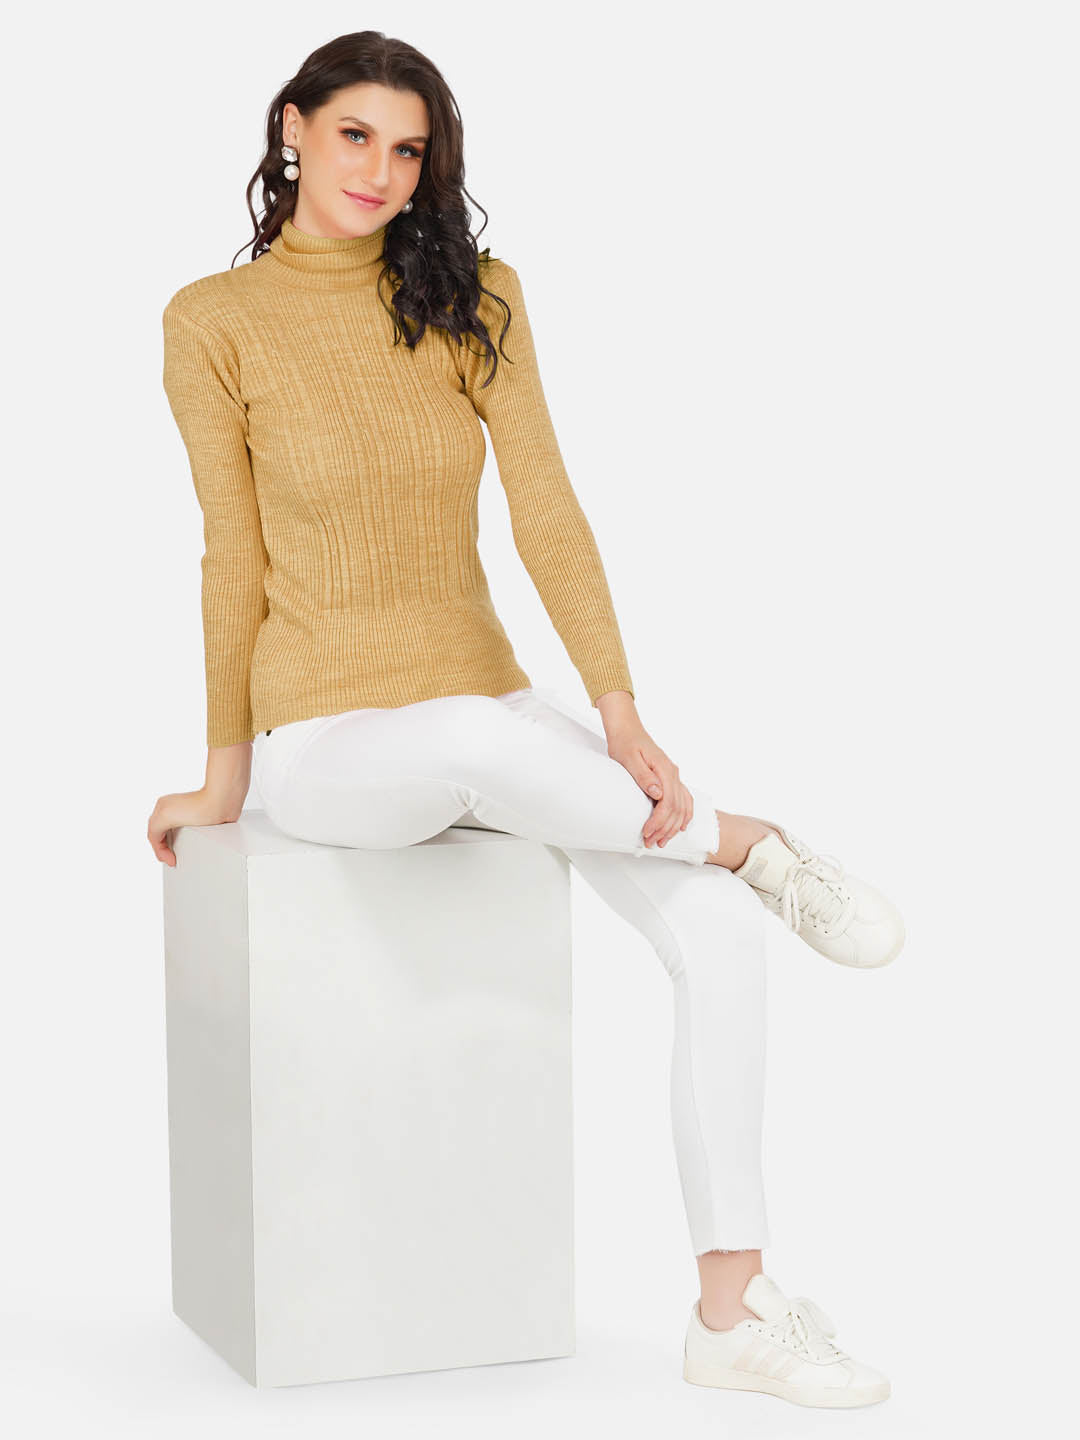 Beige Cable Design High Neck Knitted Sweater